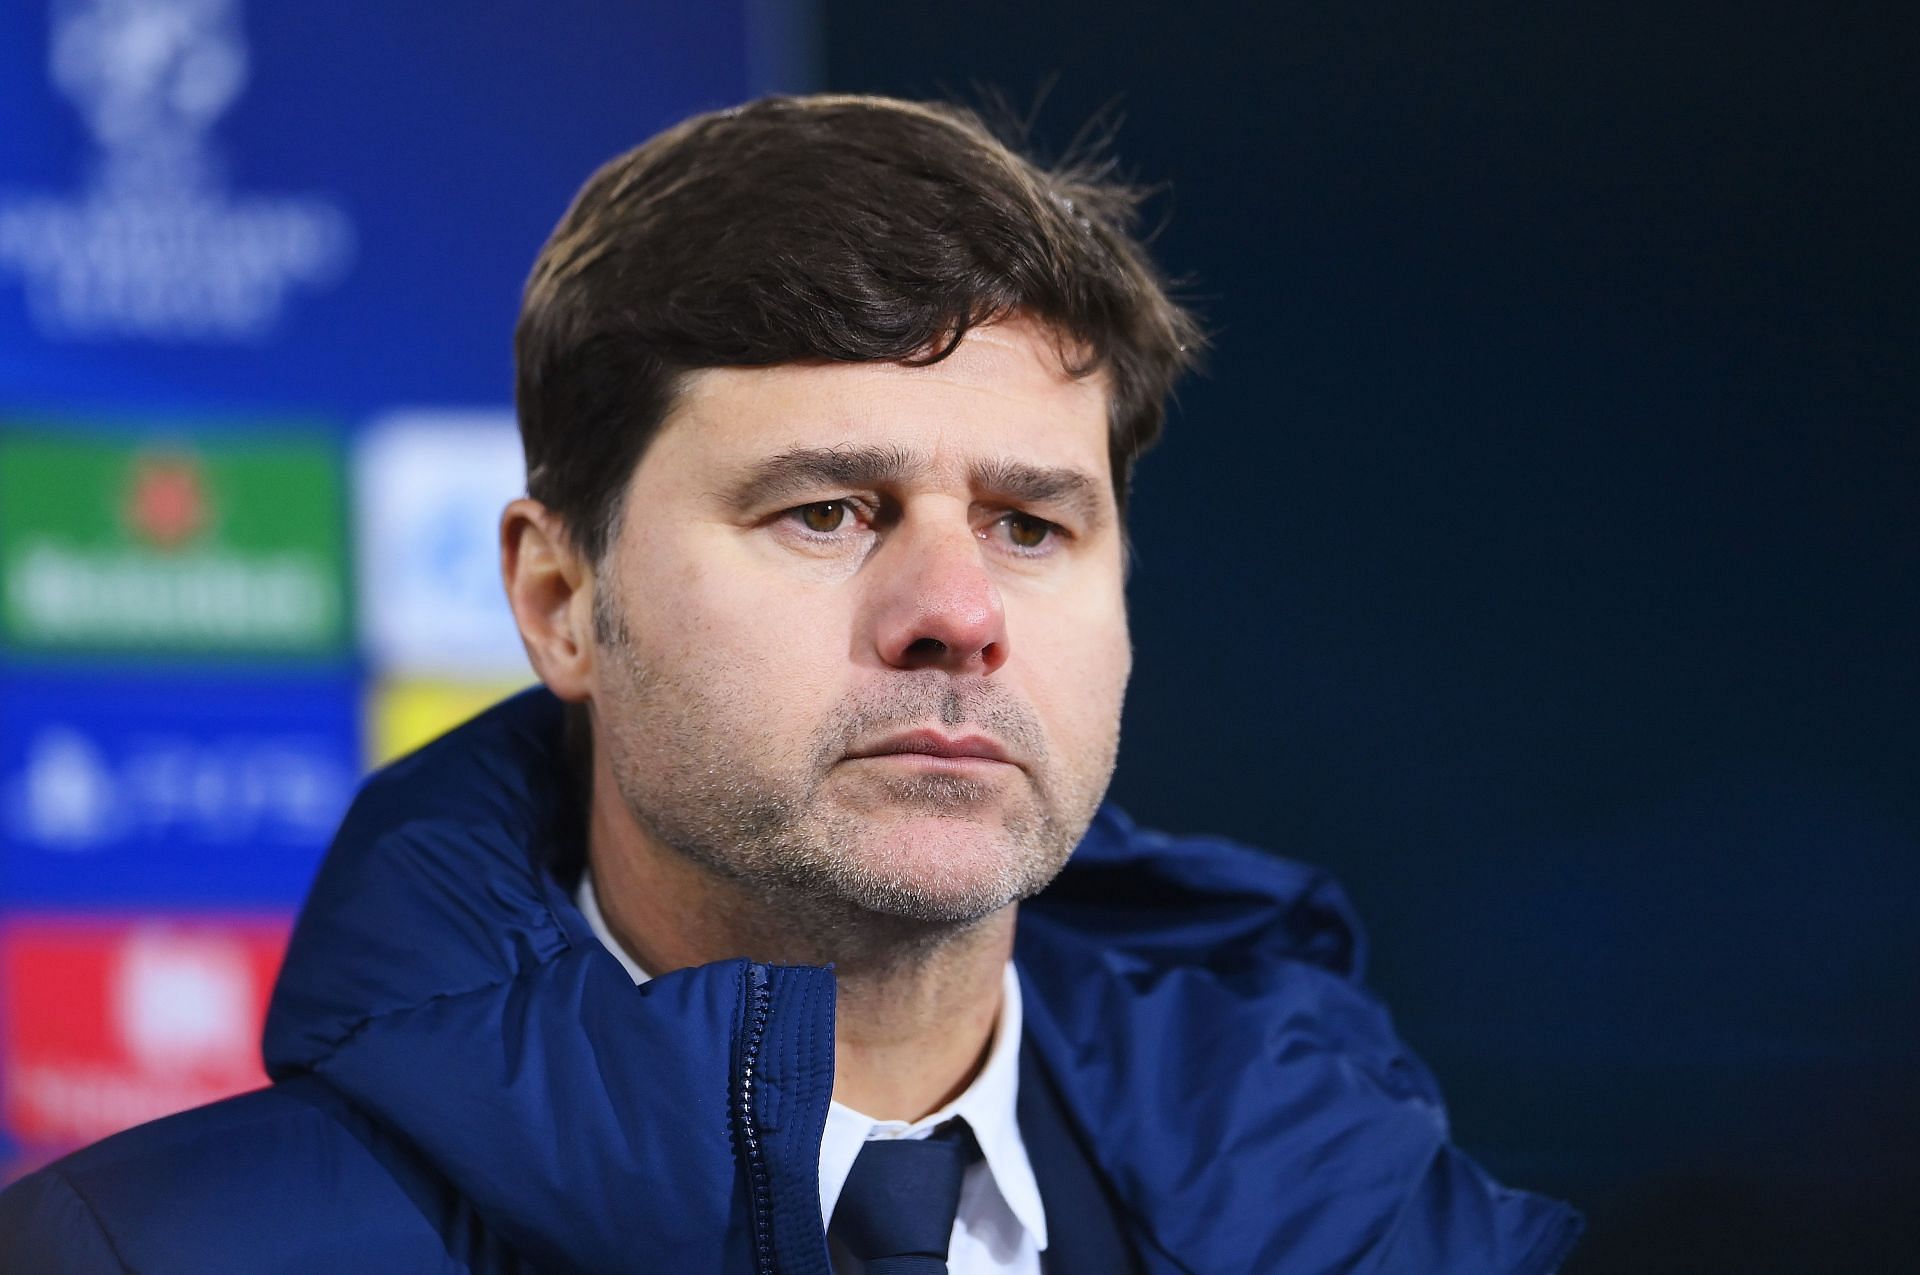 Mauricio Pochettino is in his first season with PSG